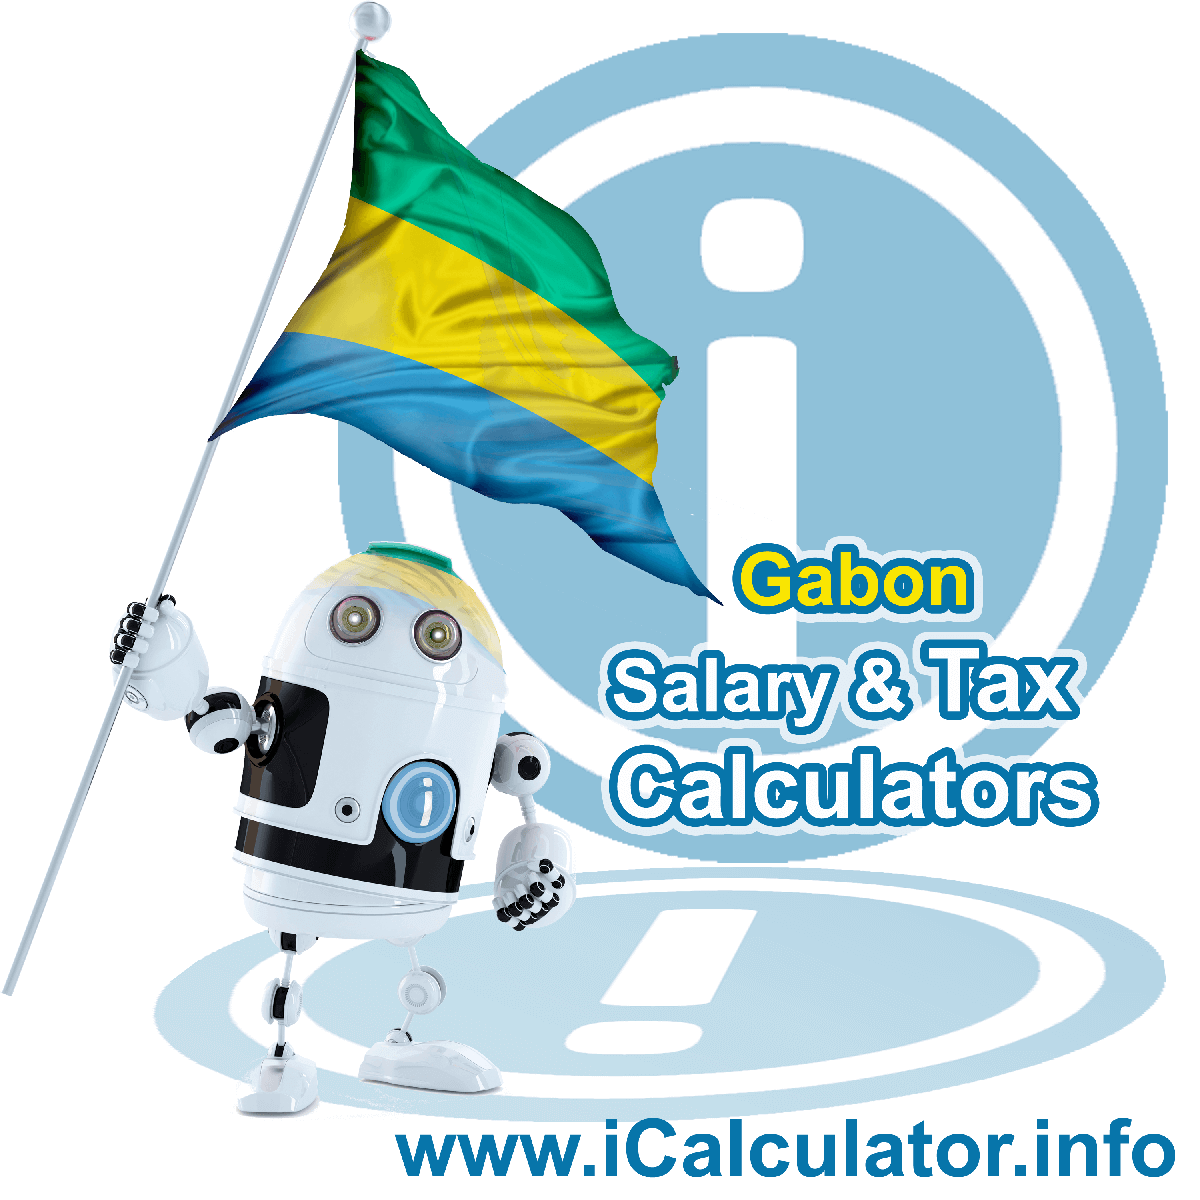 Gabon Salary Calculator. This image shows the Gabonese flag and information relating to the tax formula for the Gabon Tax Calculator